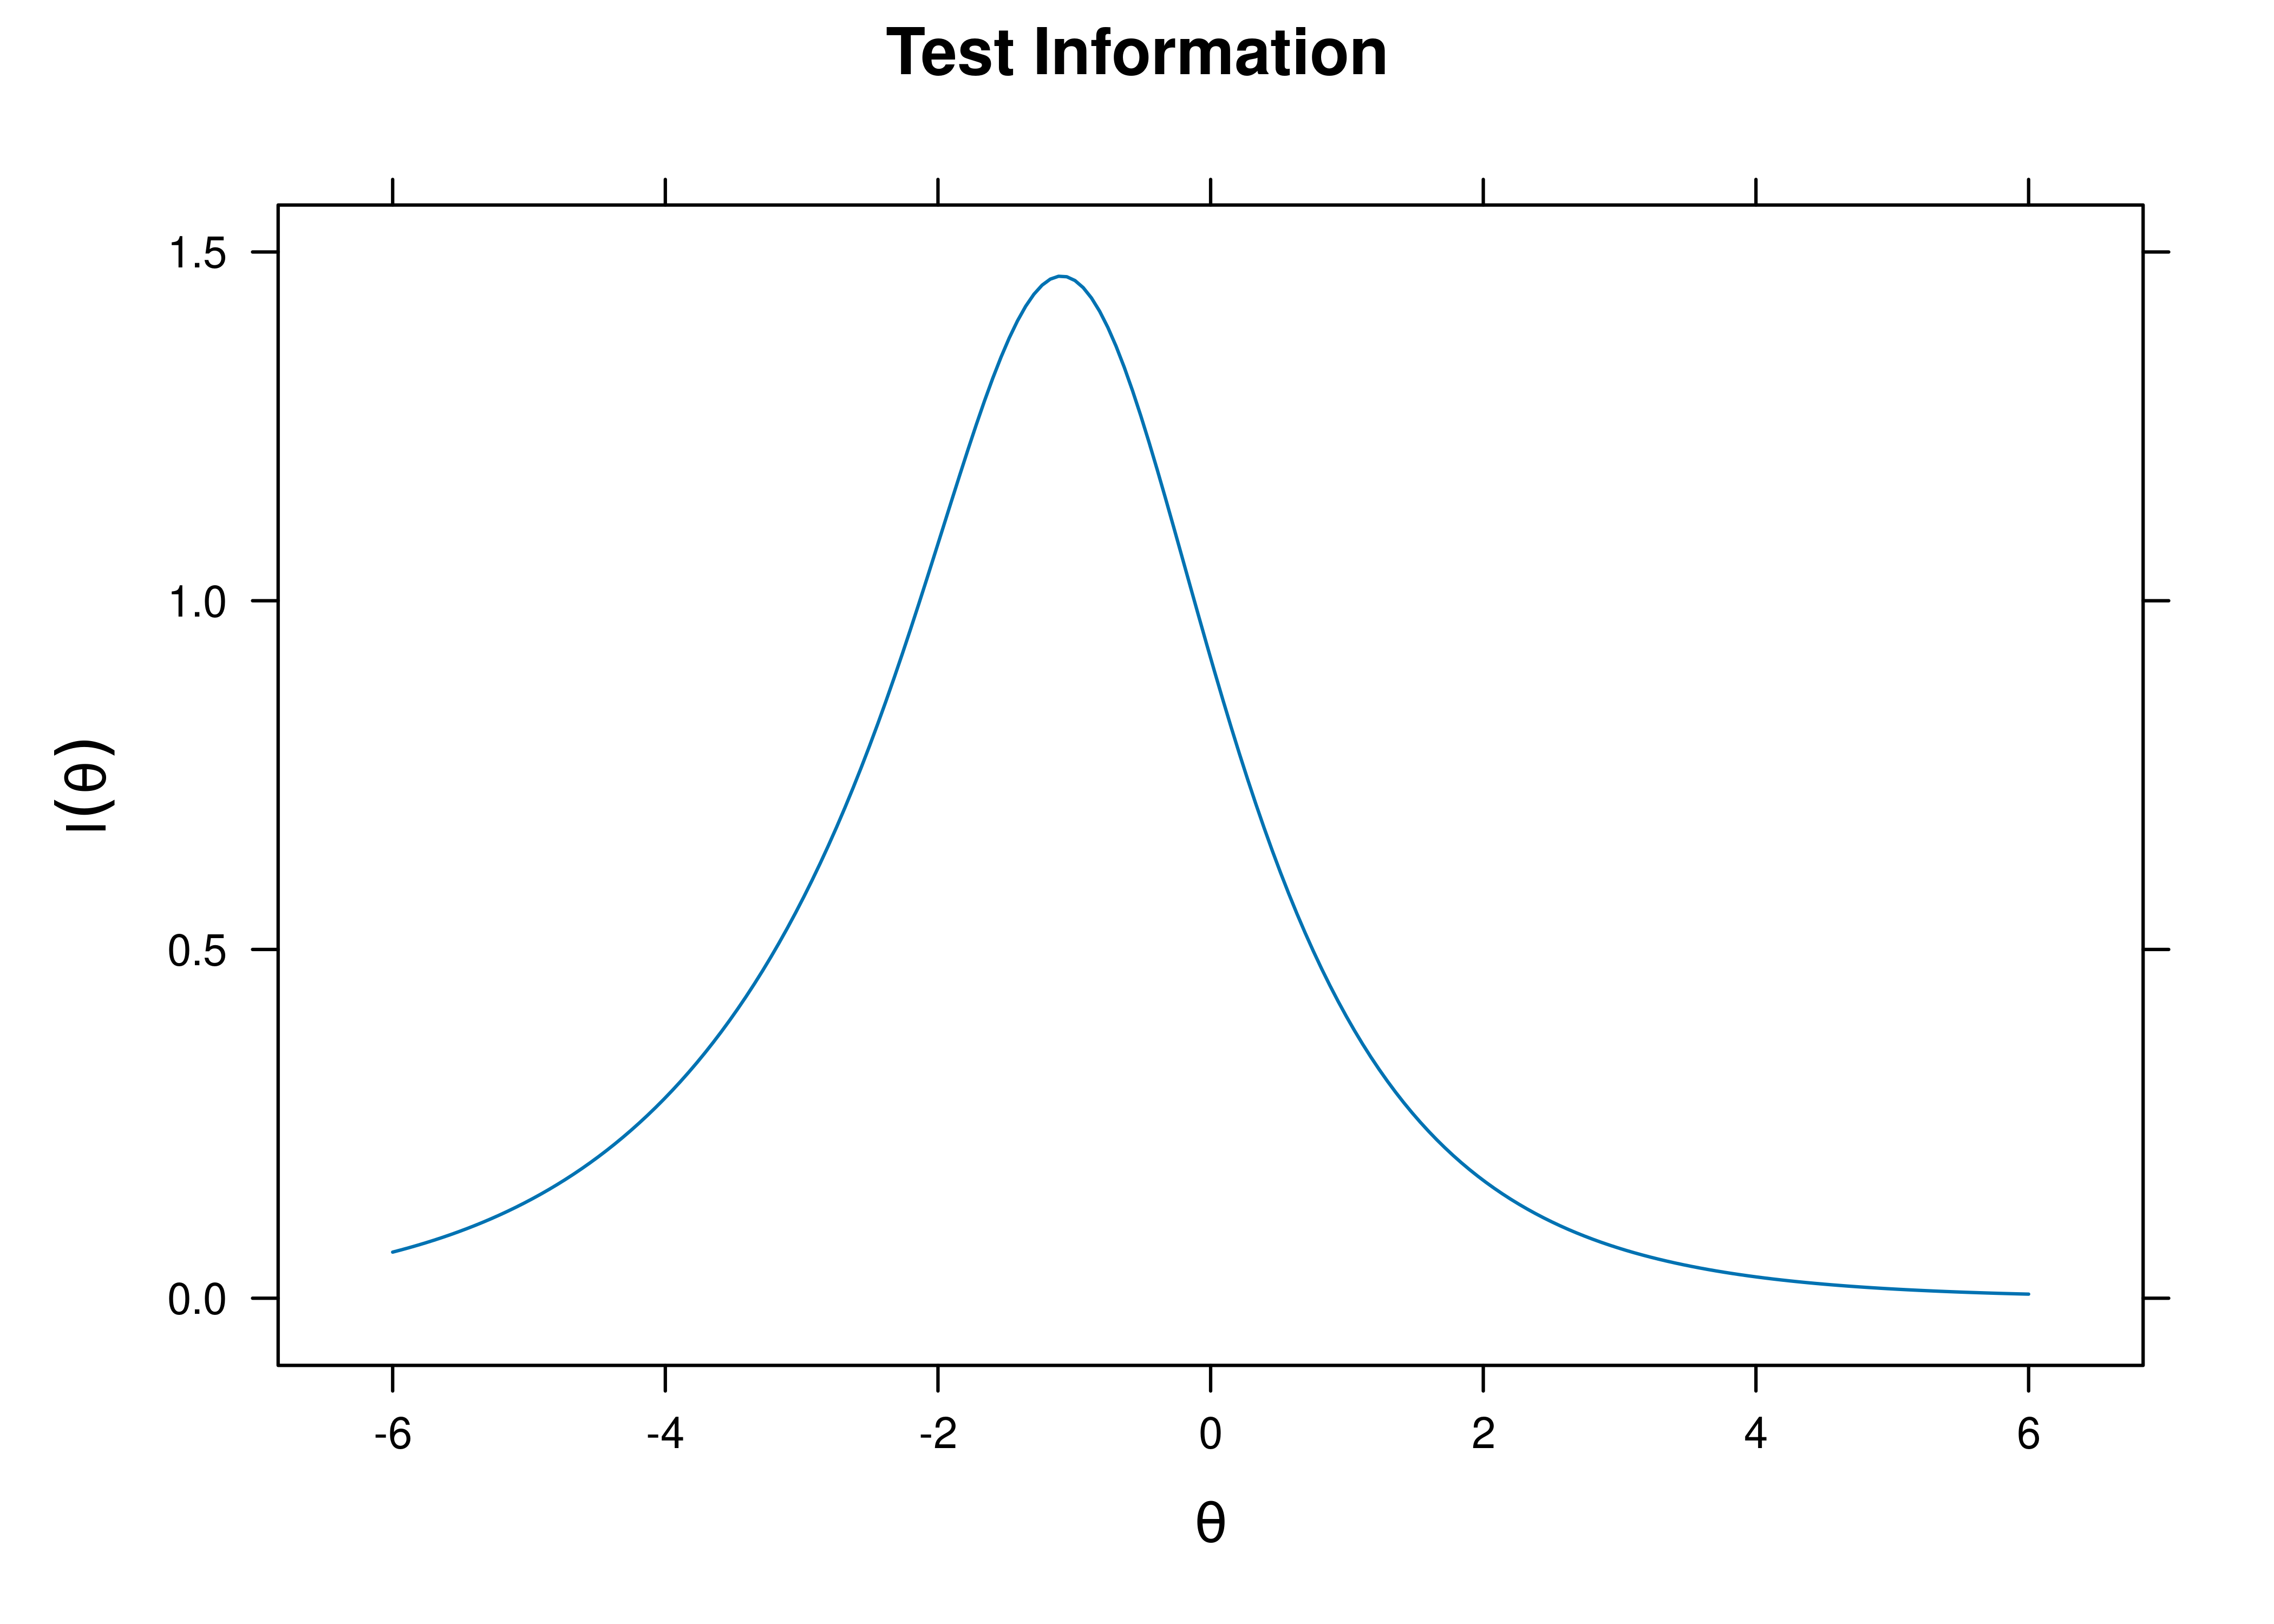 Test Information Curve From Two-Parameter Logistic Item Response Theory Model.